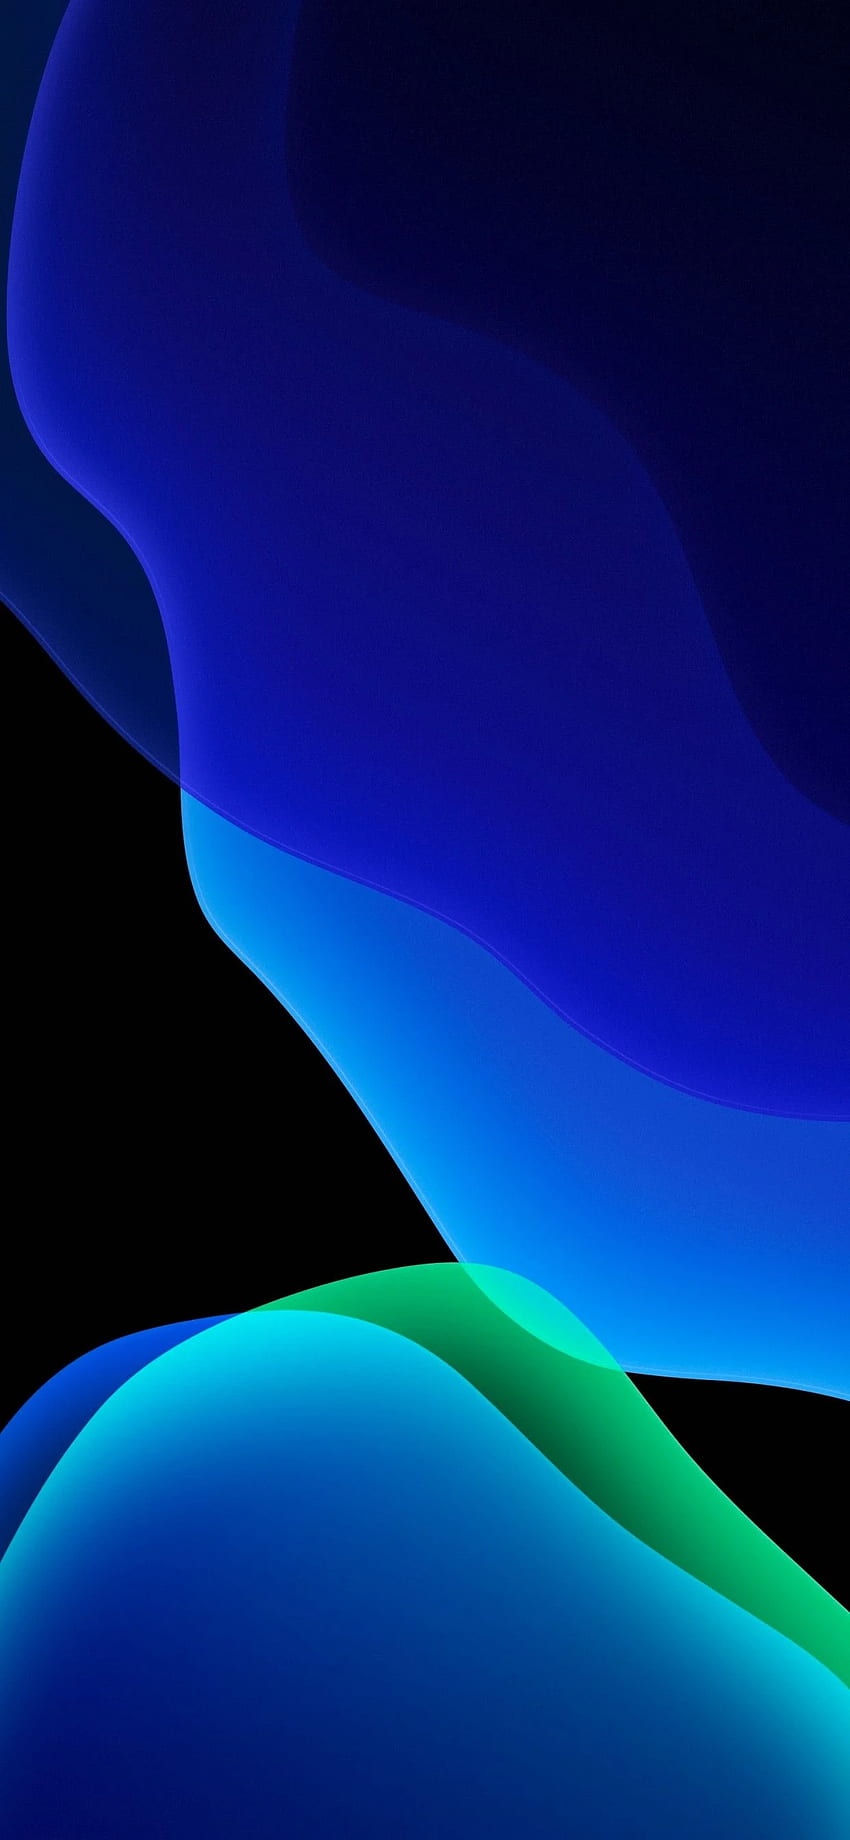 Blue Amoled Wallpapers - Top Free Blue Amoled Backgrounds - WallpaperAccess